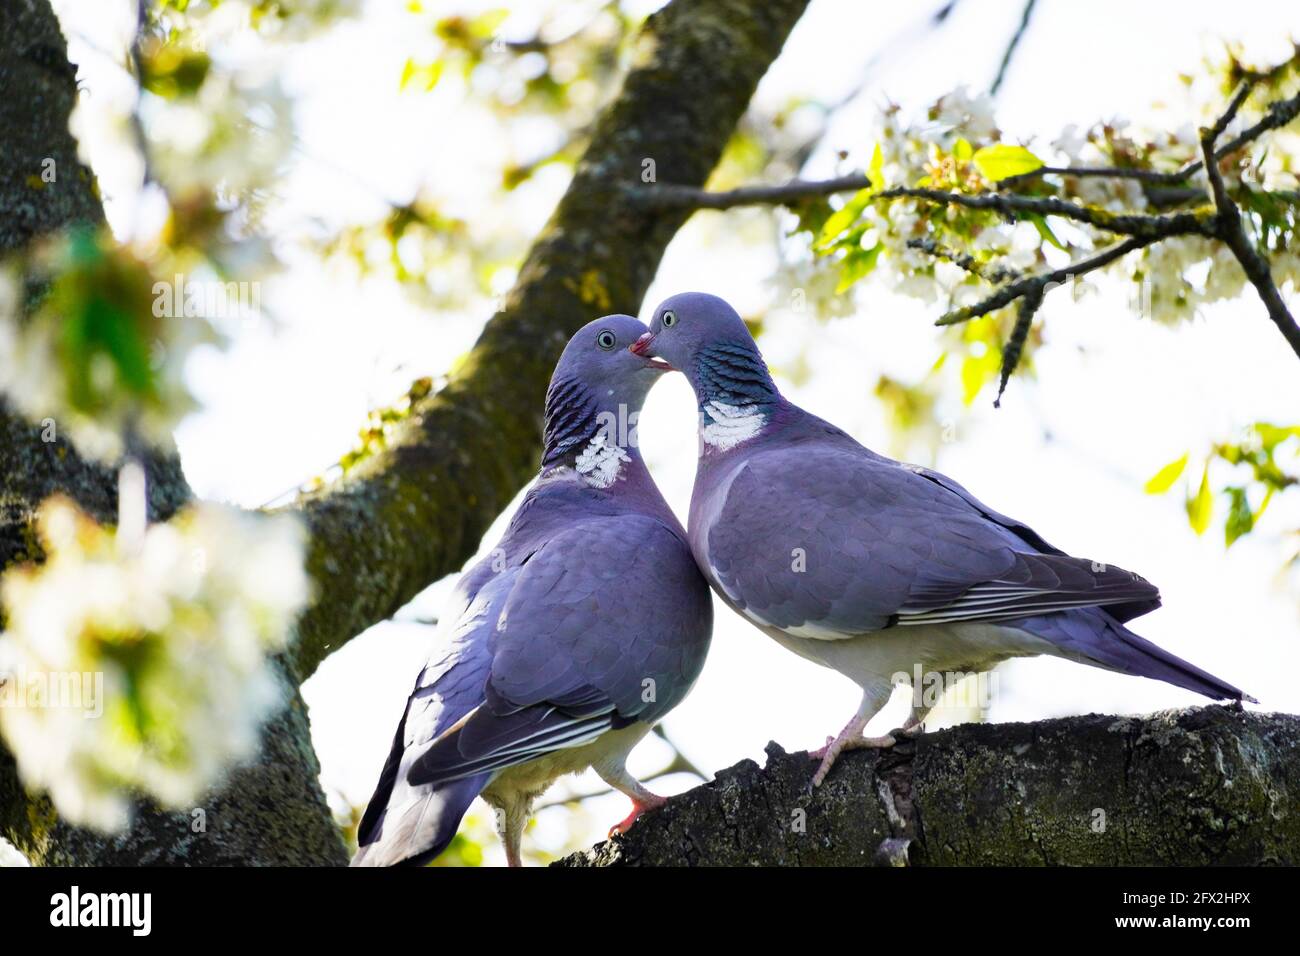 Two turtling wood pigeons are sitting on a branch in the cherry tree. Columba palumbus. Birds with gray plumage. European bird. Stock Photo